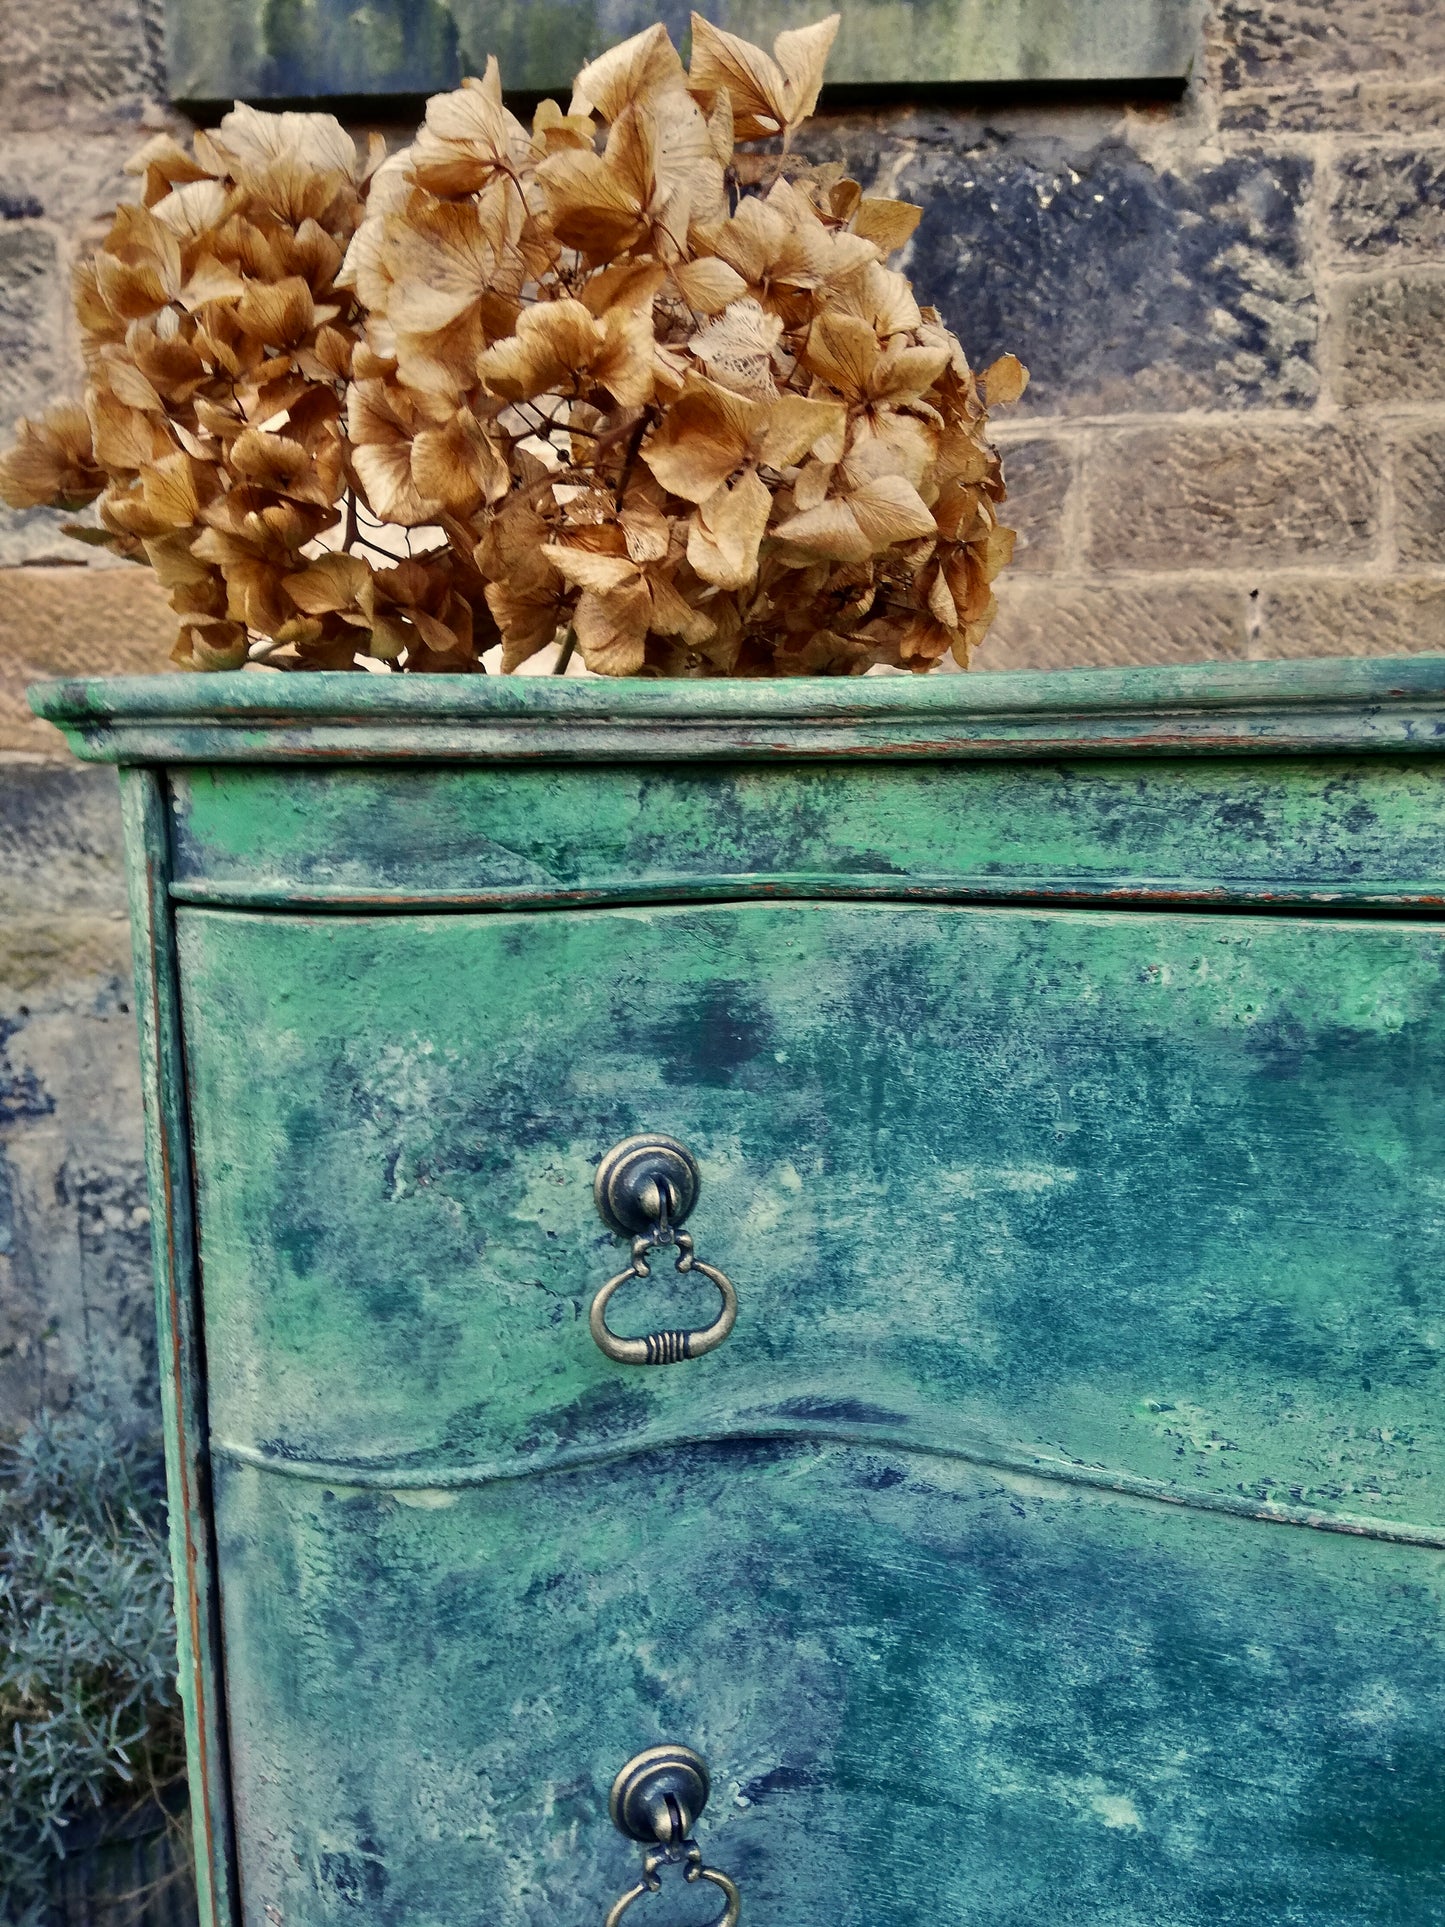 Commission for Laura Layered Annie Sloan chest of drawers in Greens